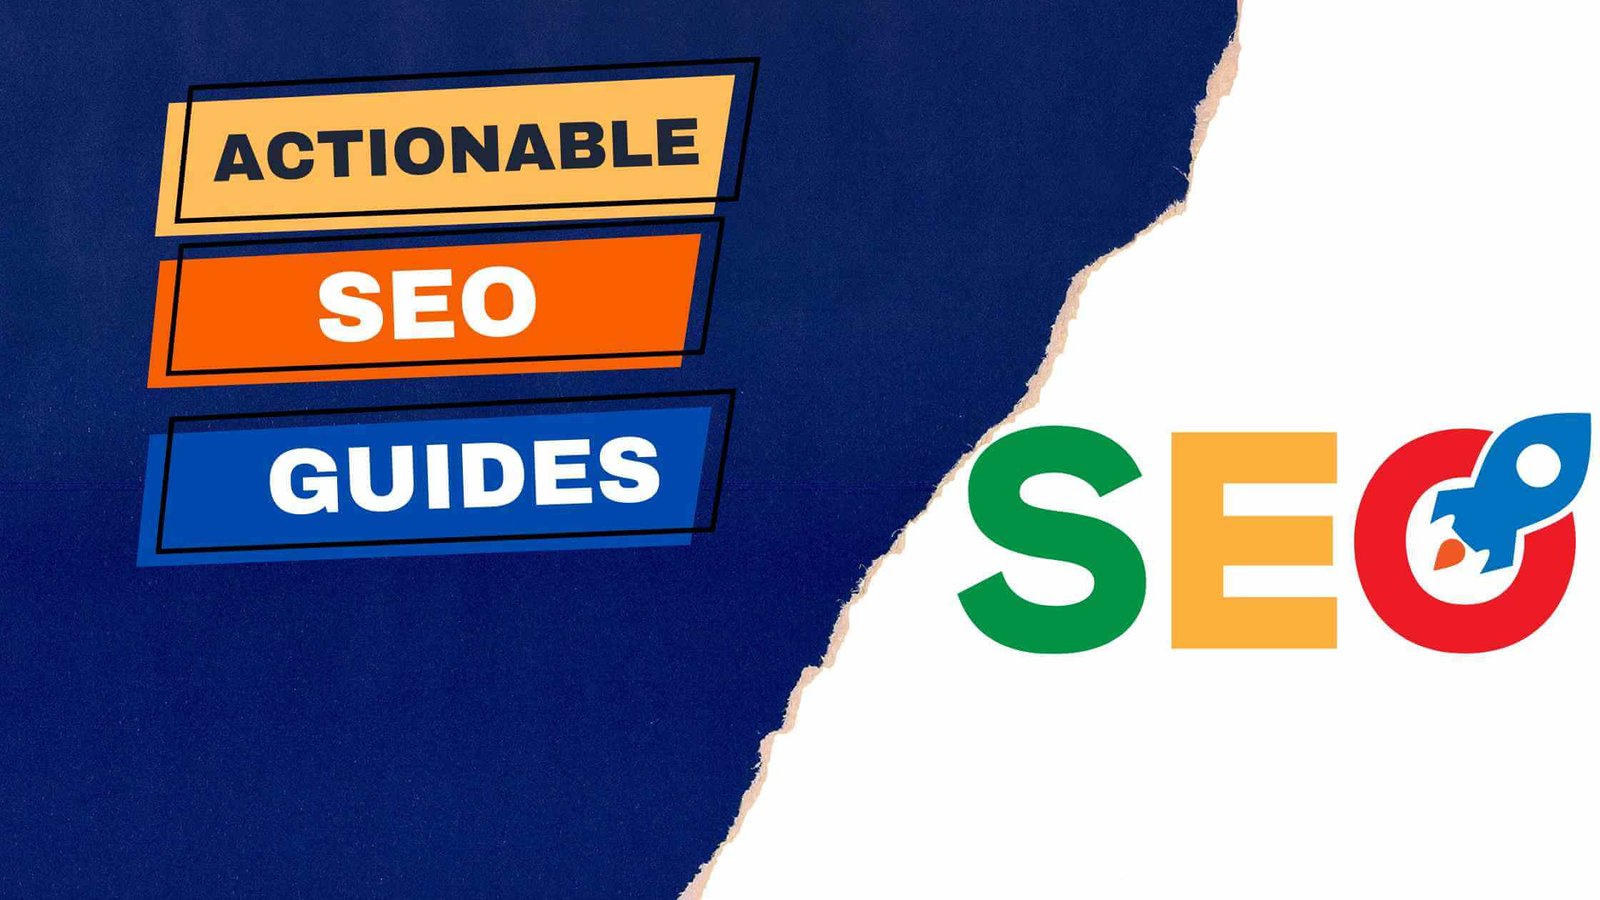 Actionable SEO Guides ..